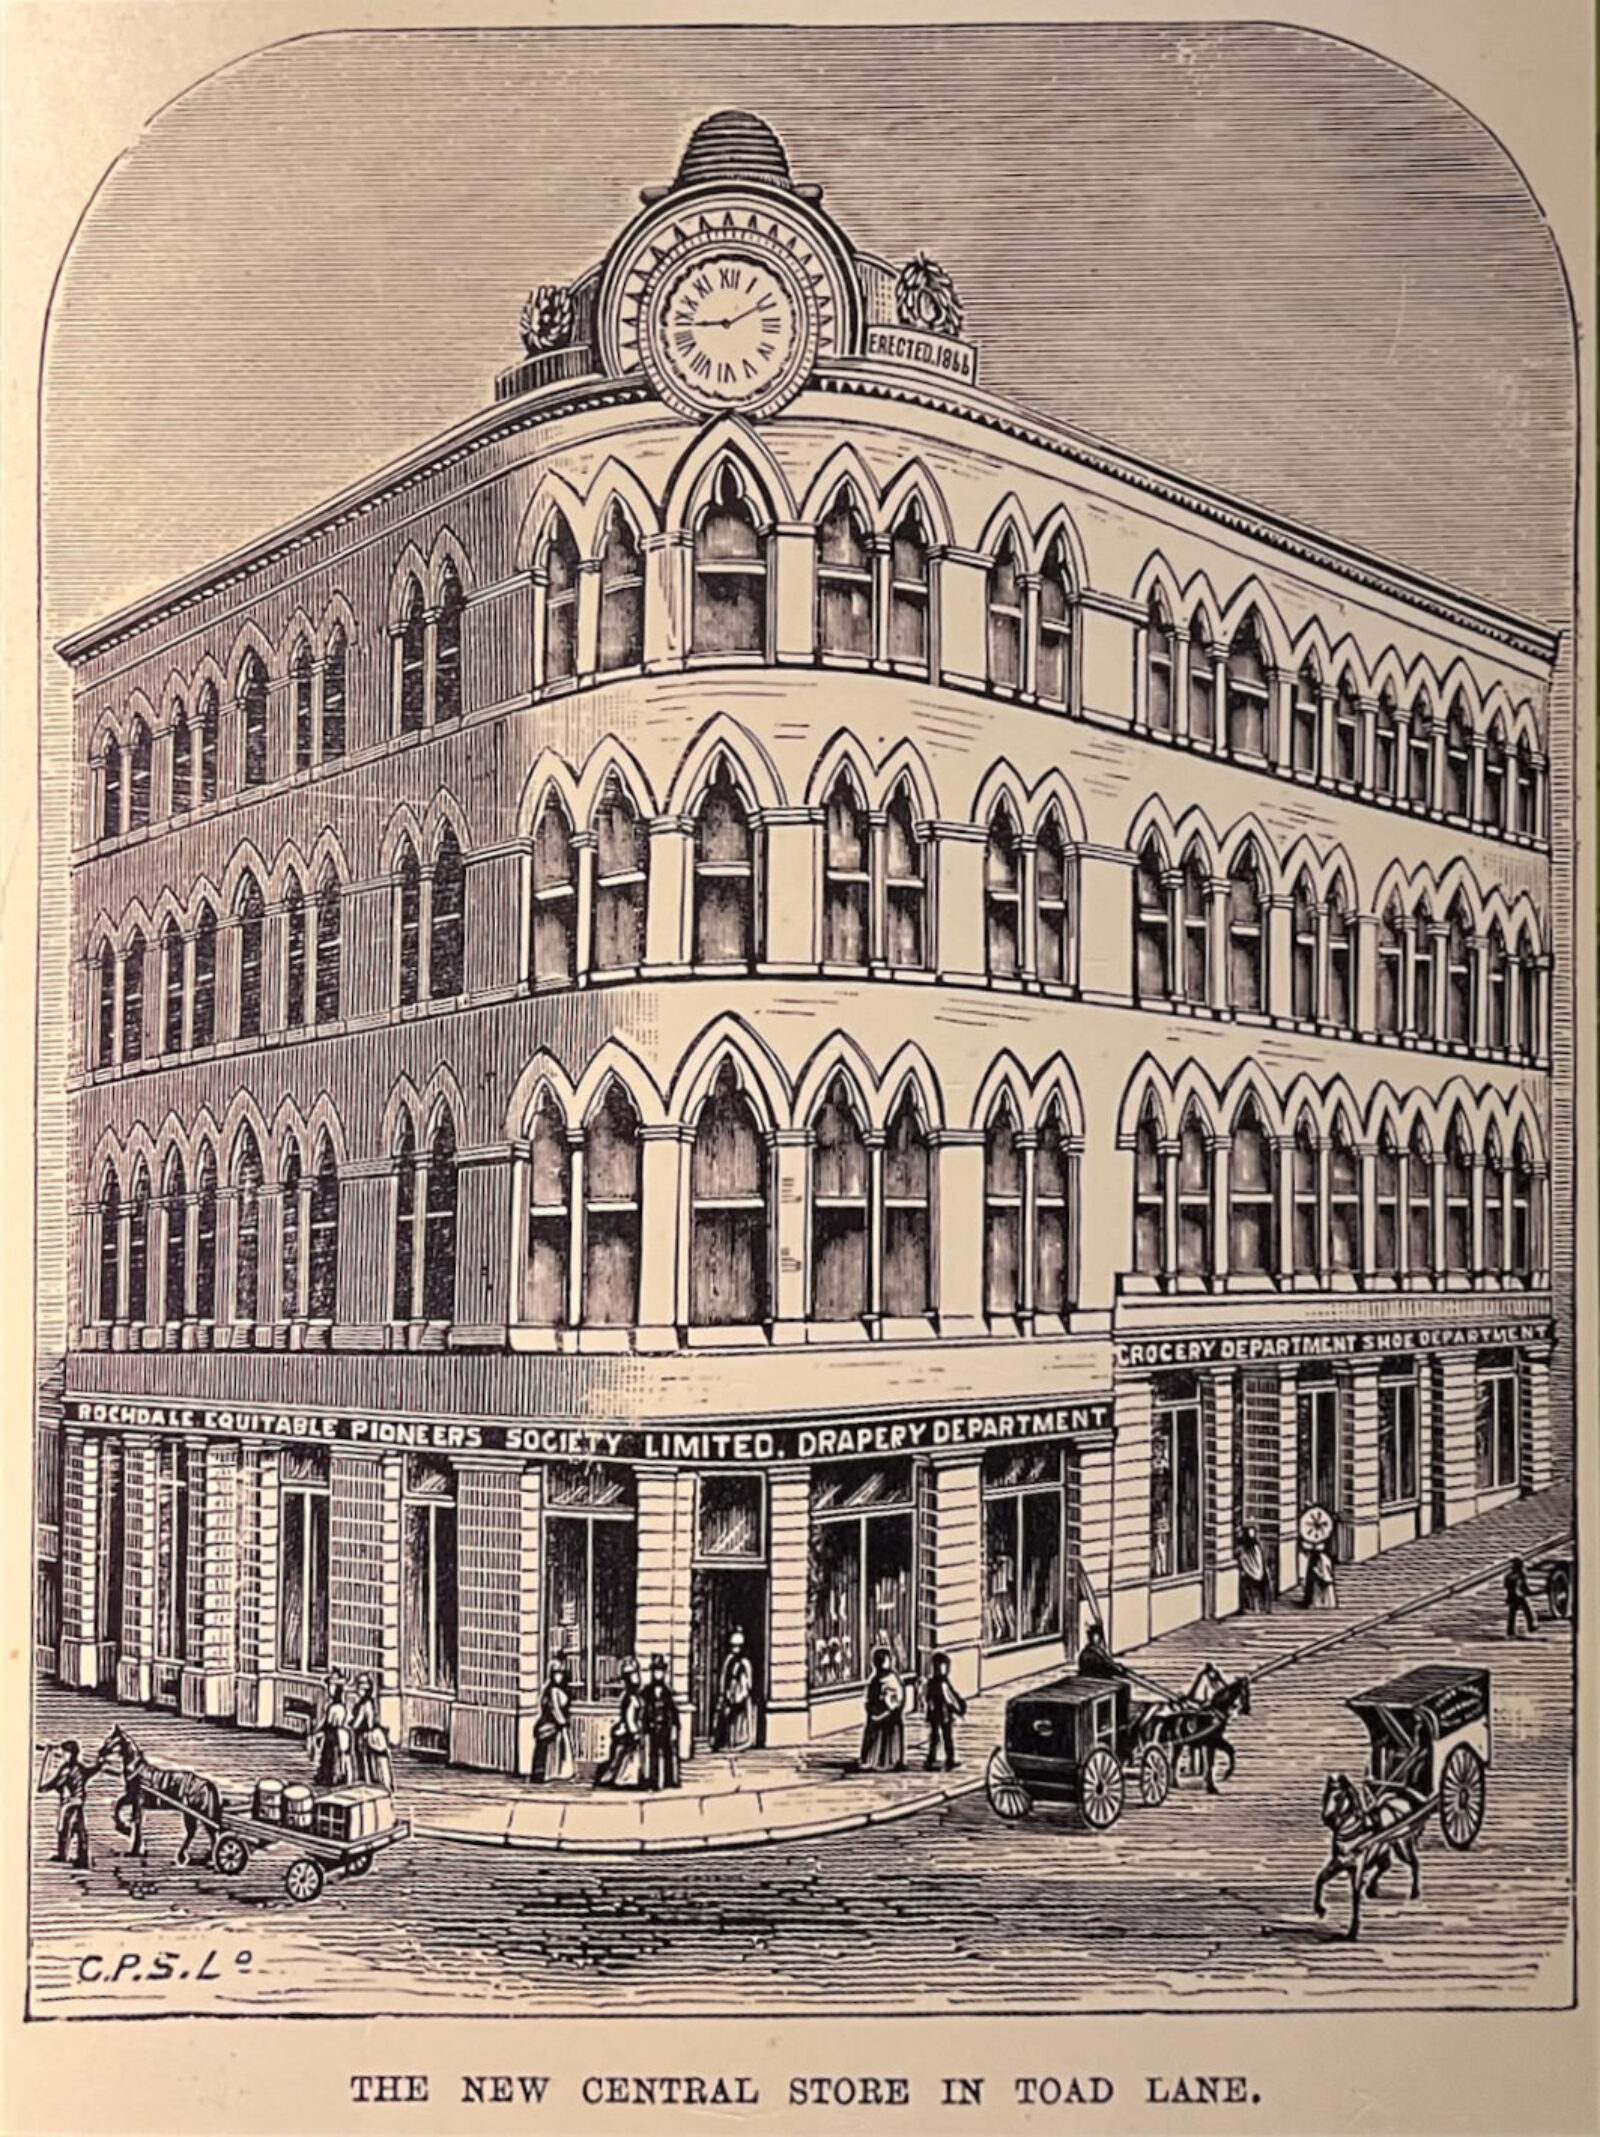 An illustration of “the new central store in toad lane” of the Rochdale Pioneers. Impressive store building, with arched windows, decorated and a beehive ornament at the top.